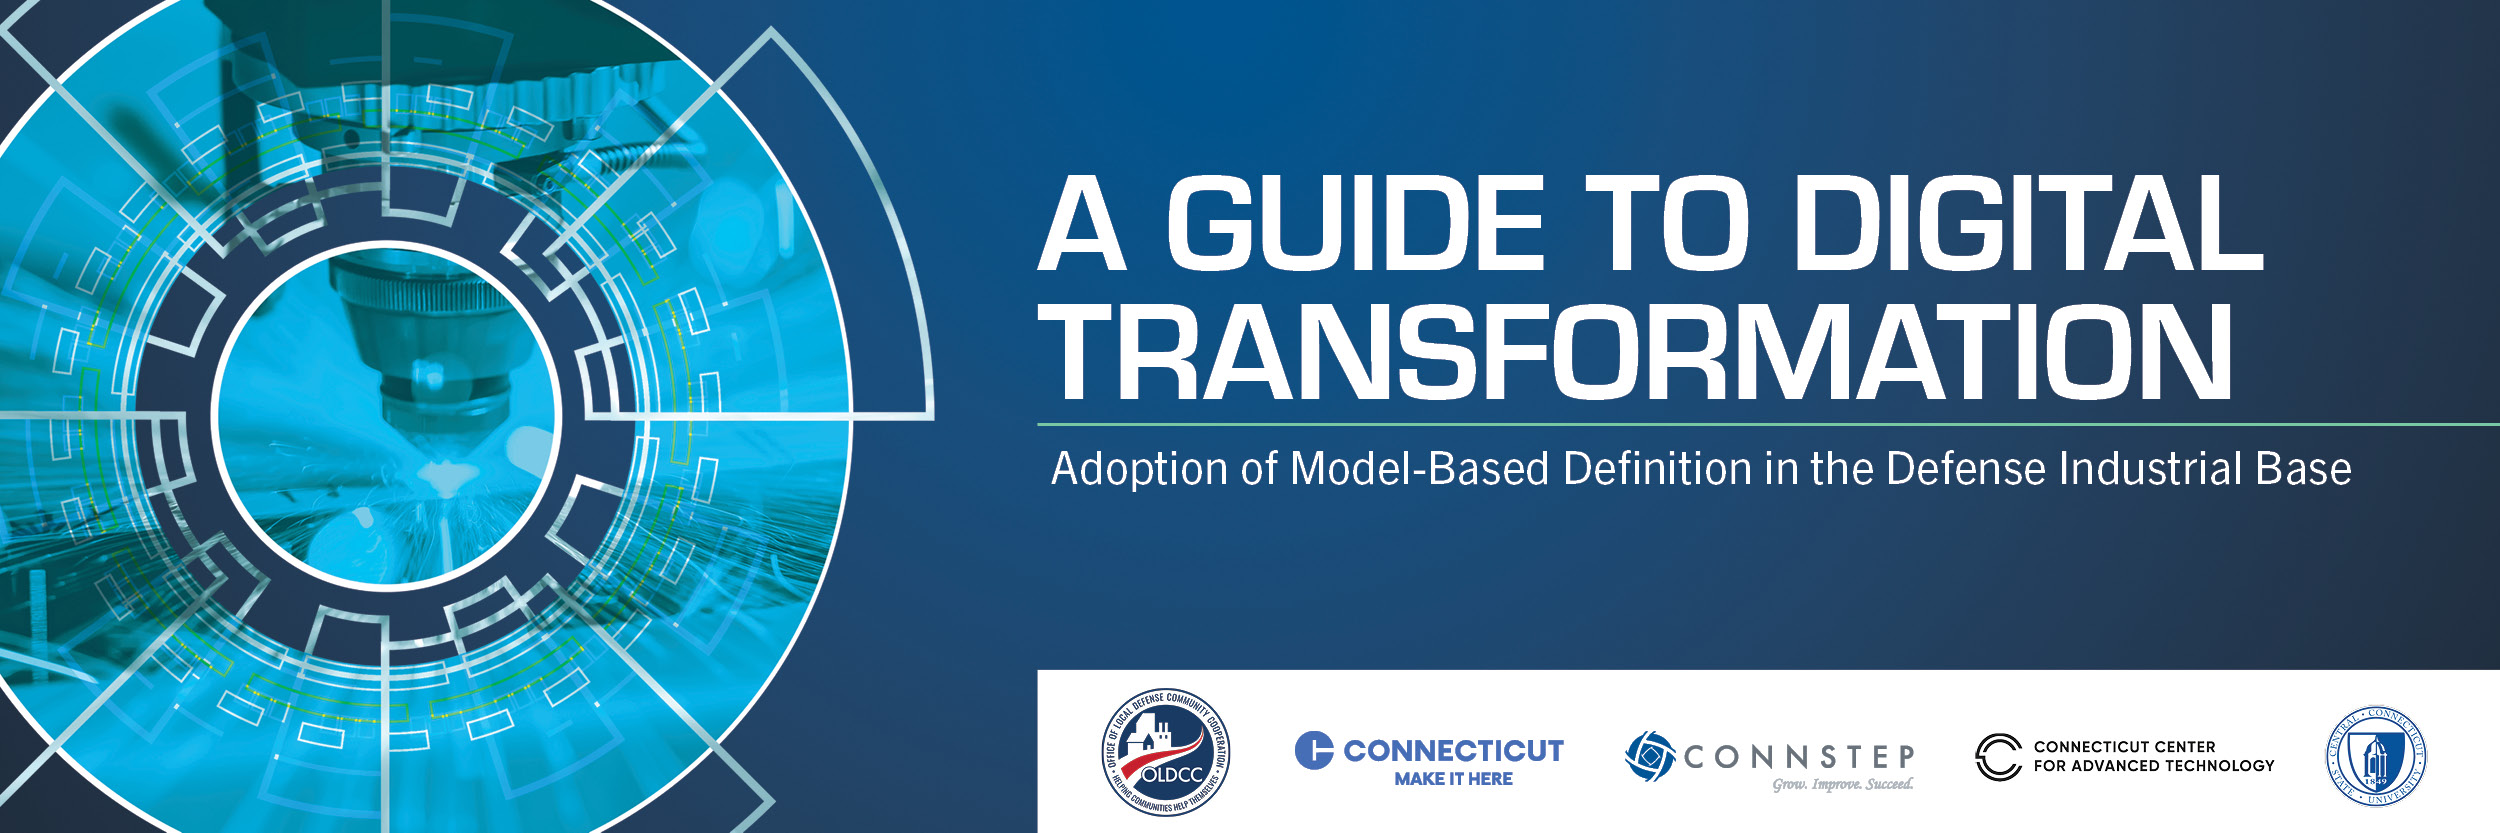 A Guide to Digital Transformation Hosted by CT State Community College Quinebaug Valley